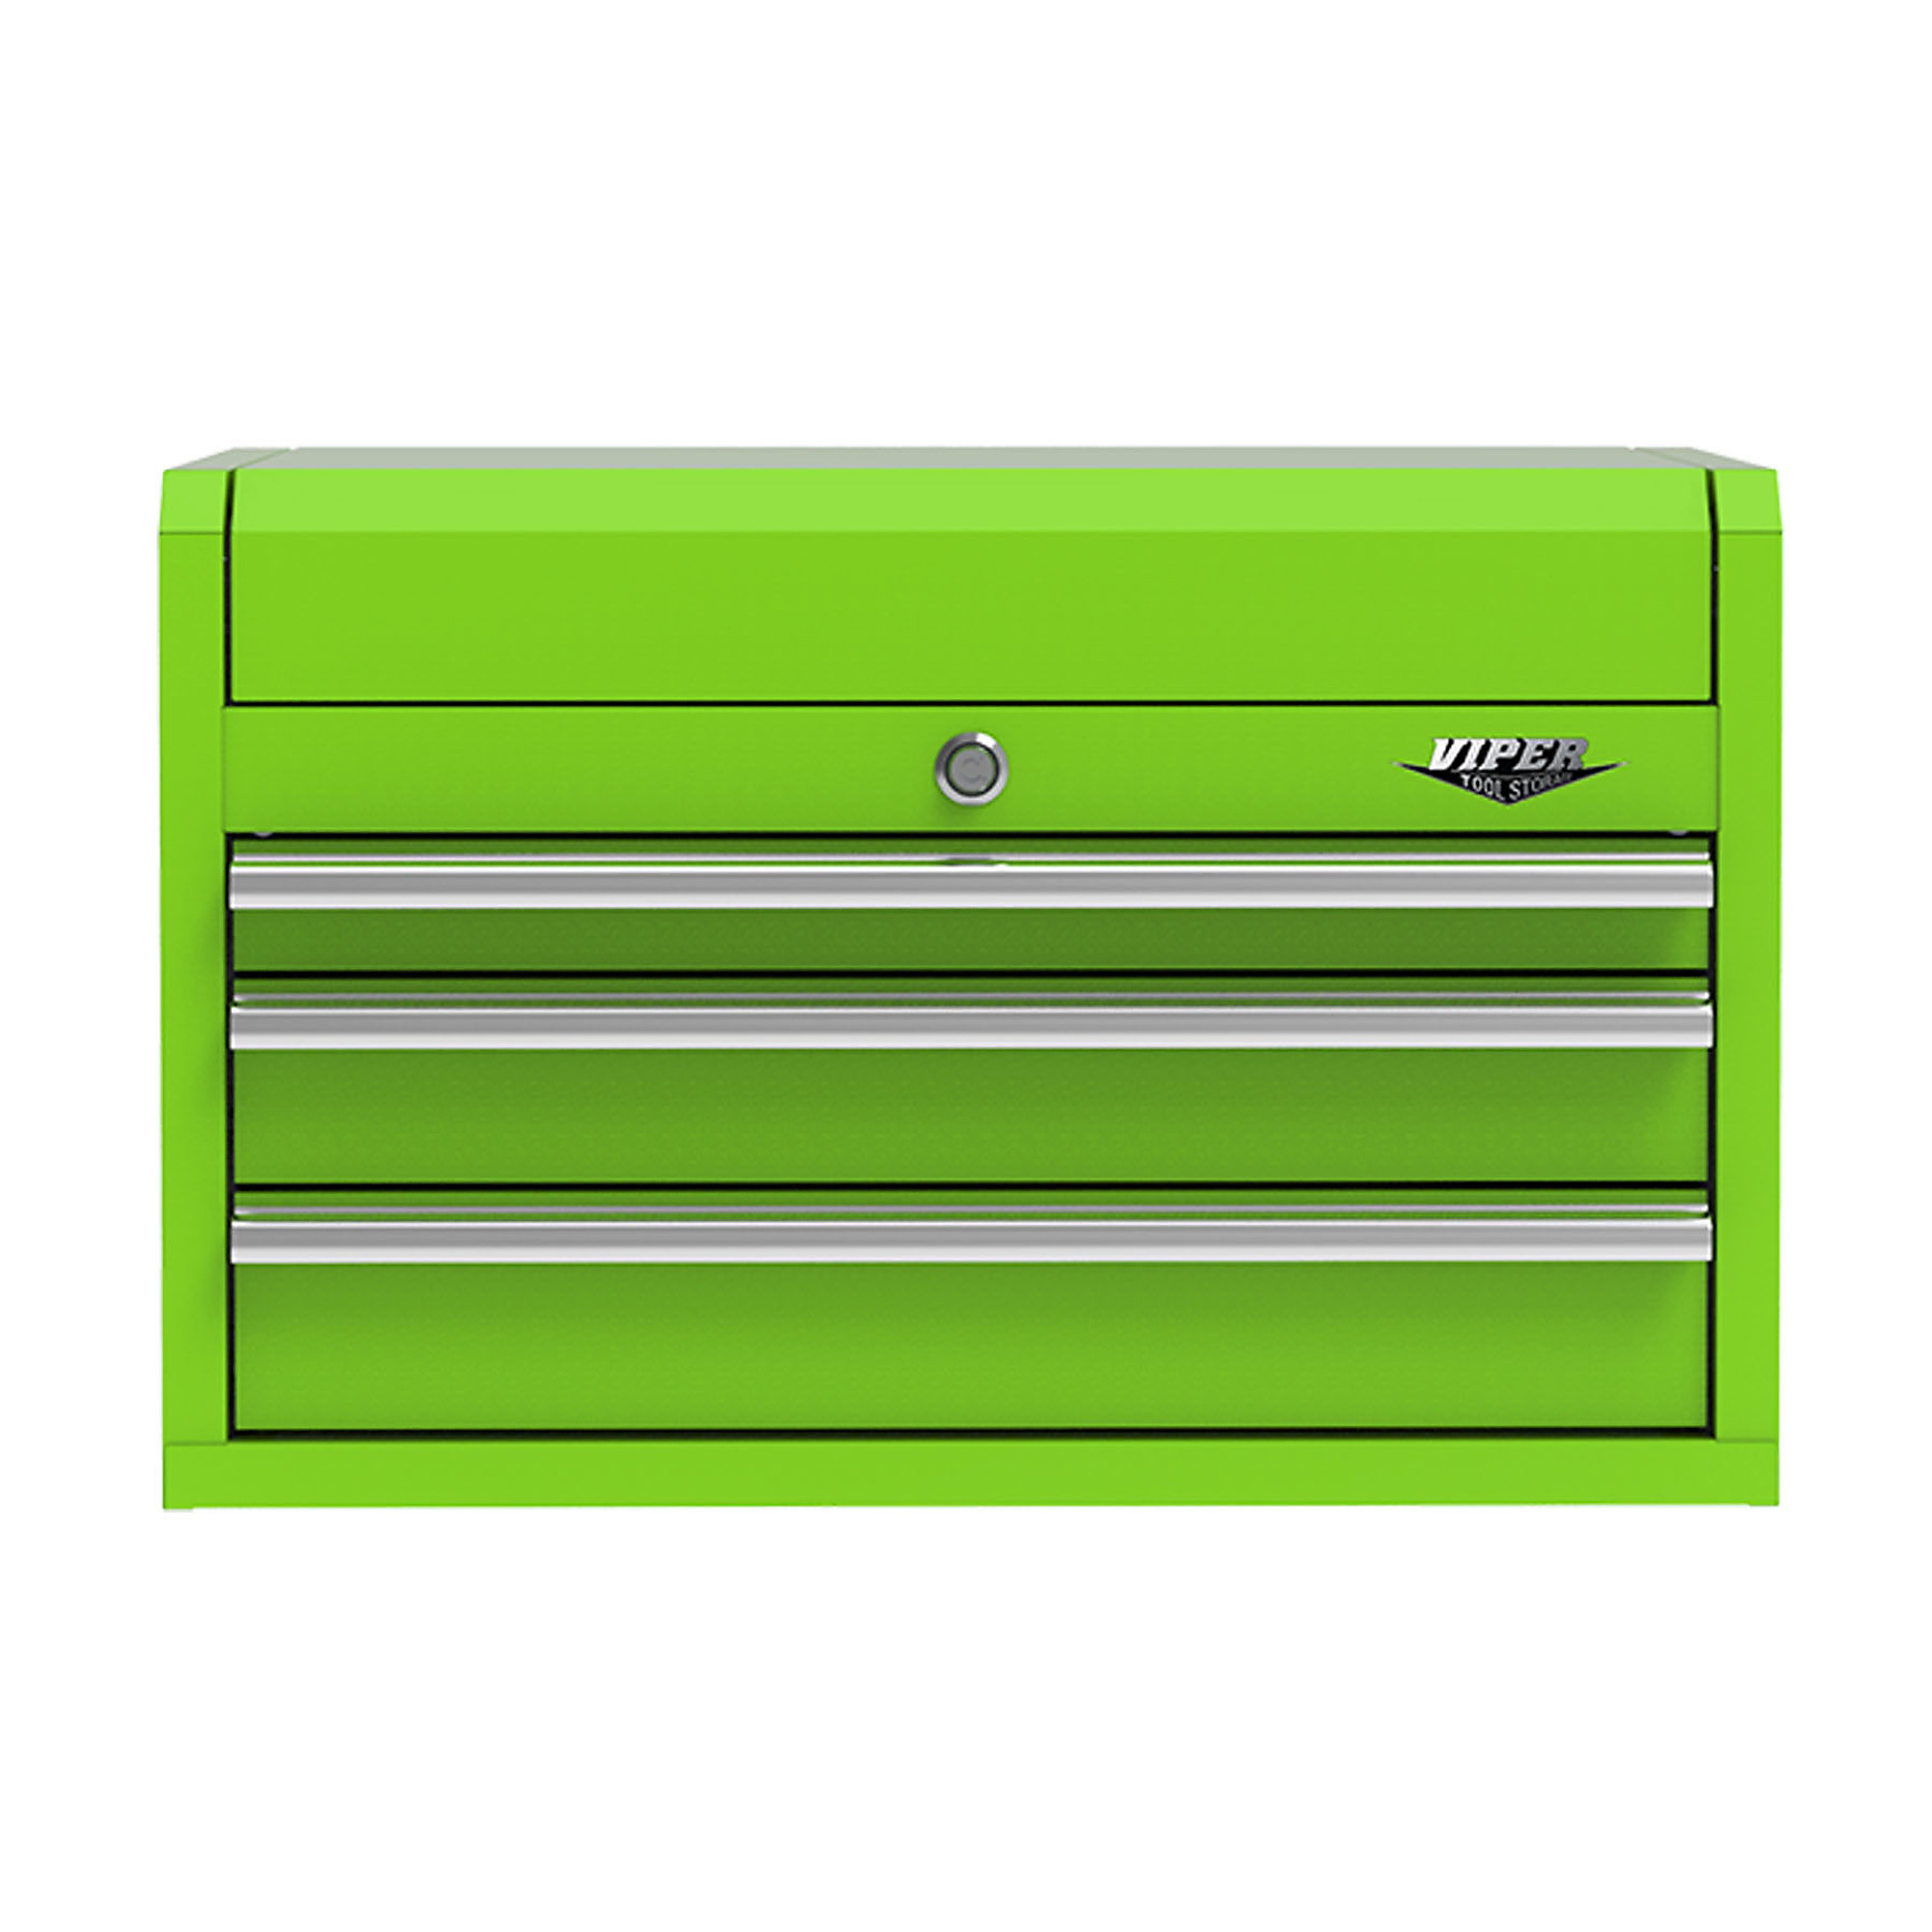 Viper Tool Storage, 3-Drawer Top Chest, Lime Green, Width 26 in, Height 16.75 in, Color Lime, Model LB2603CSC